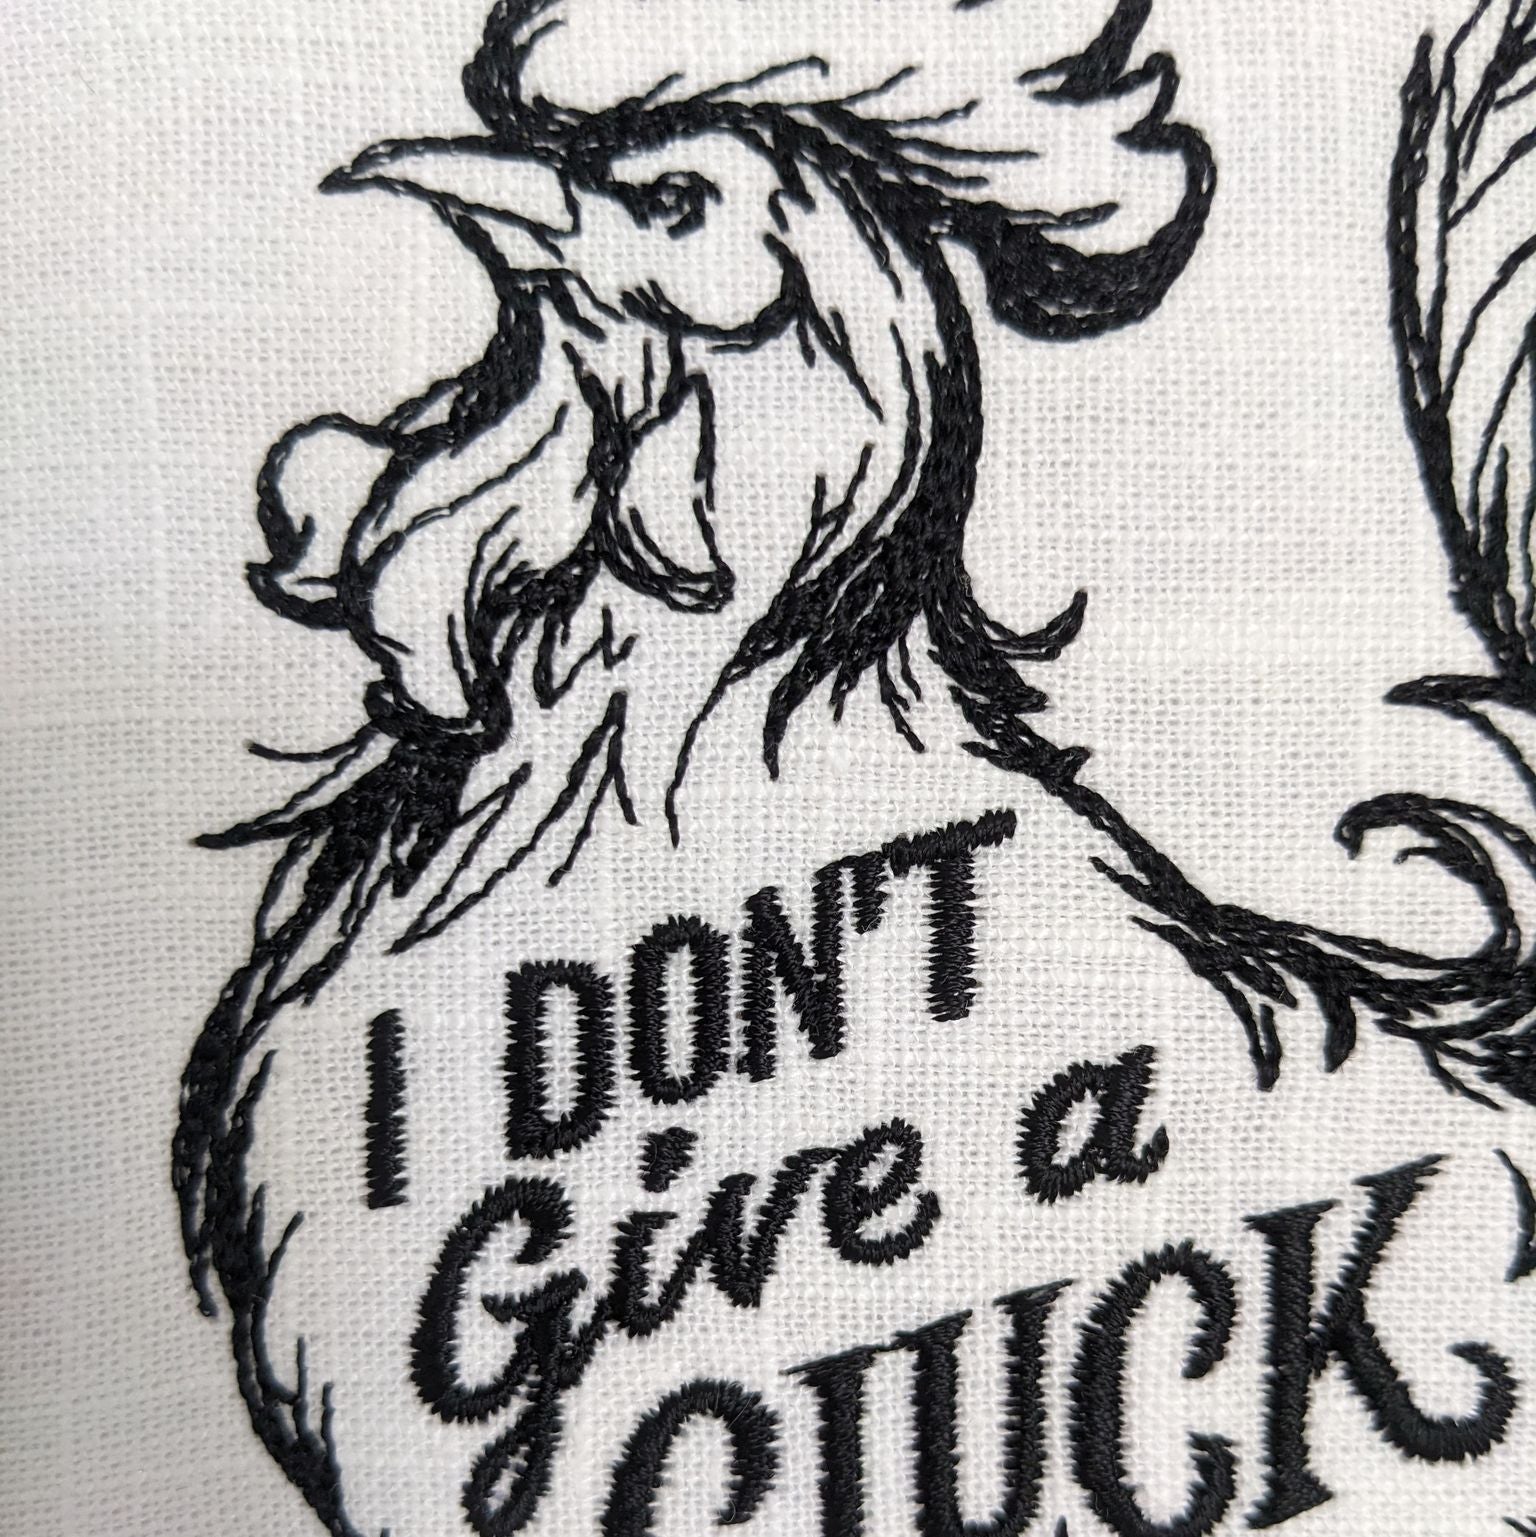 I don't give a cluck. Machine embroidery 8" hoop art